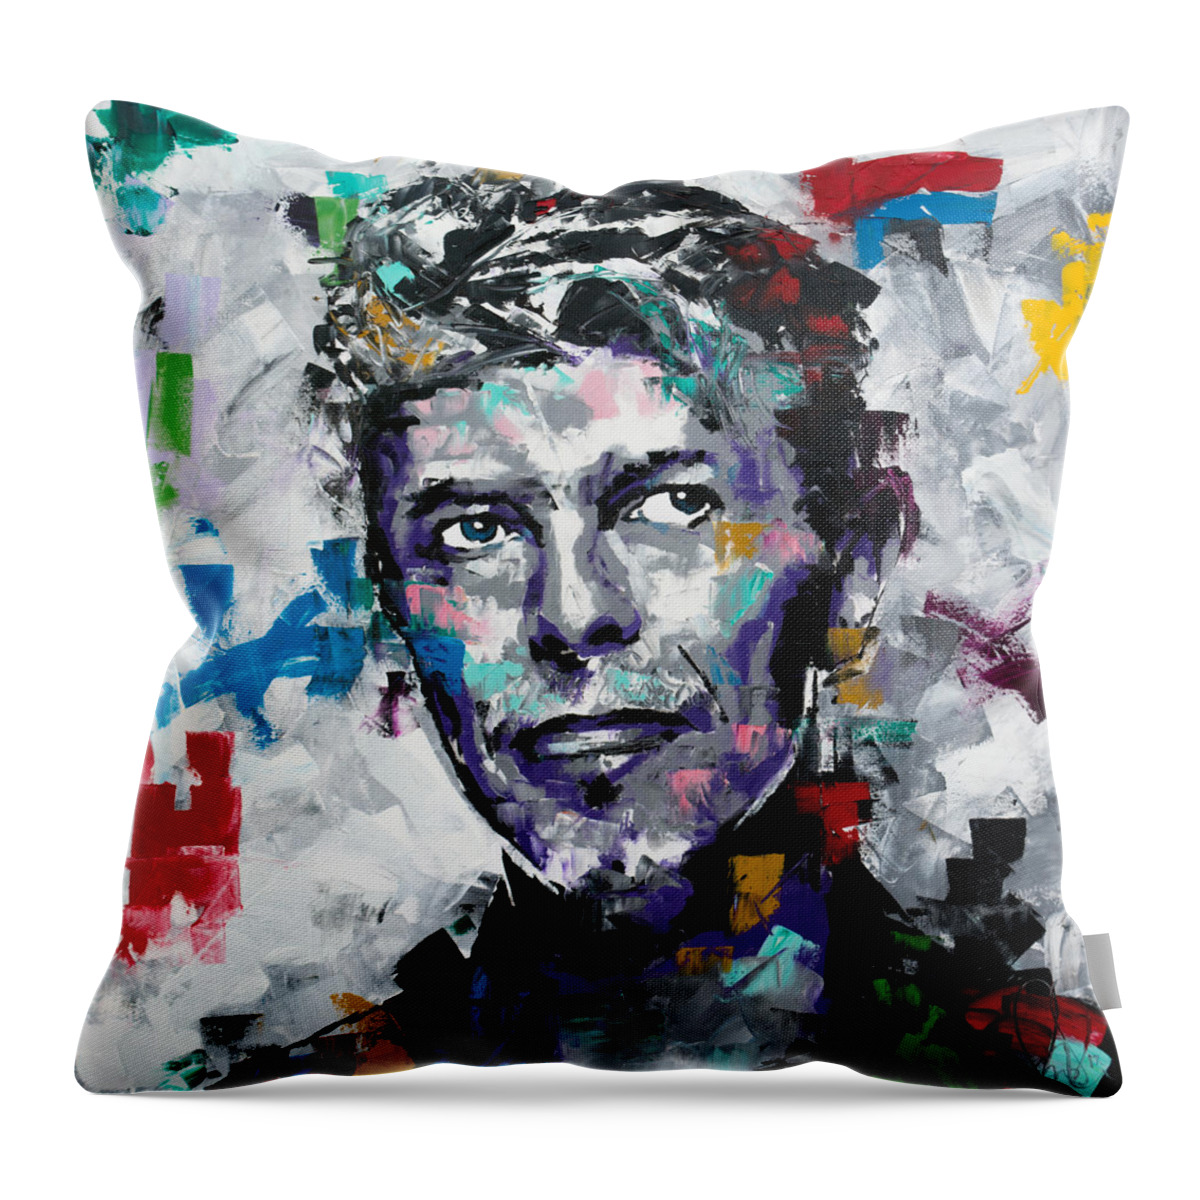 David Throw Pillow featuring the painting David Bowie II by Richard Day